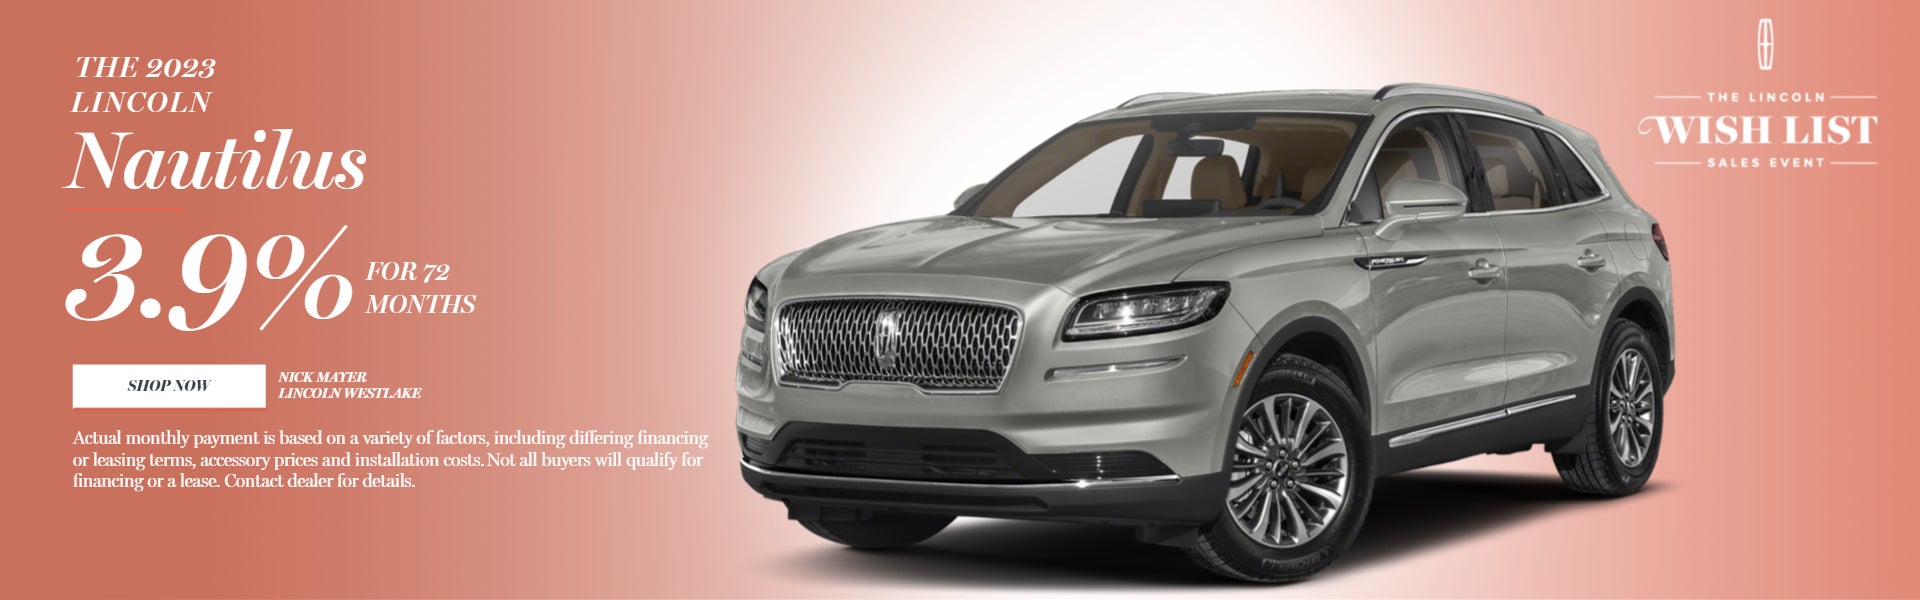 2023 Lincoln Nautilus 3.9% for 72 months